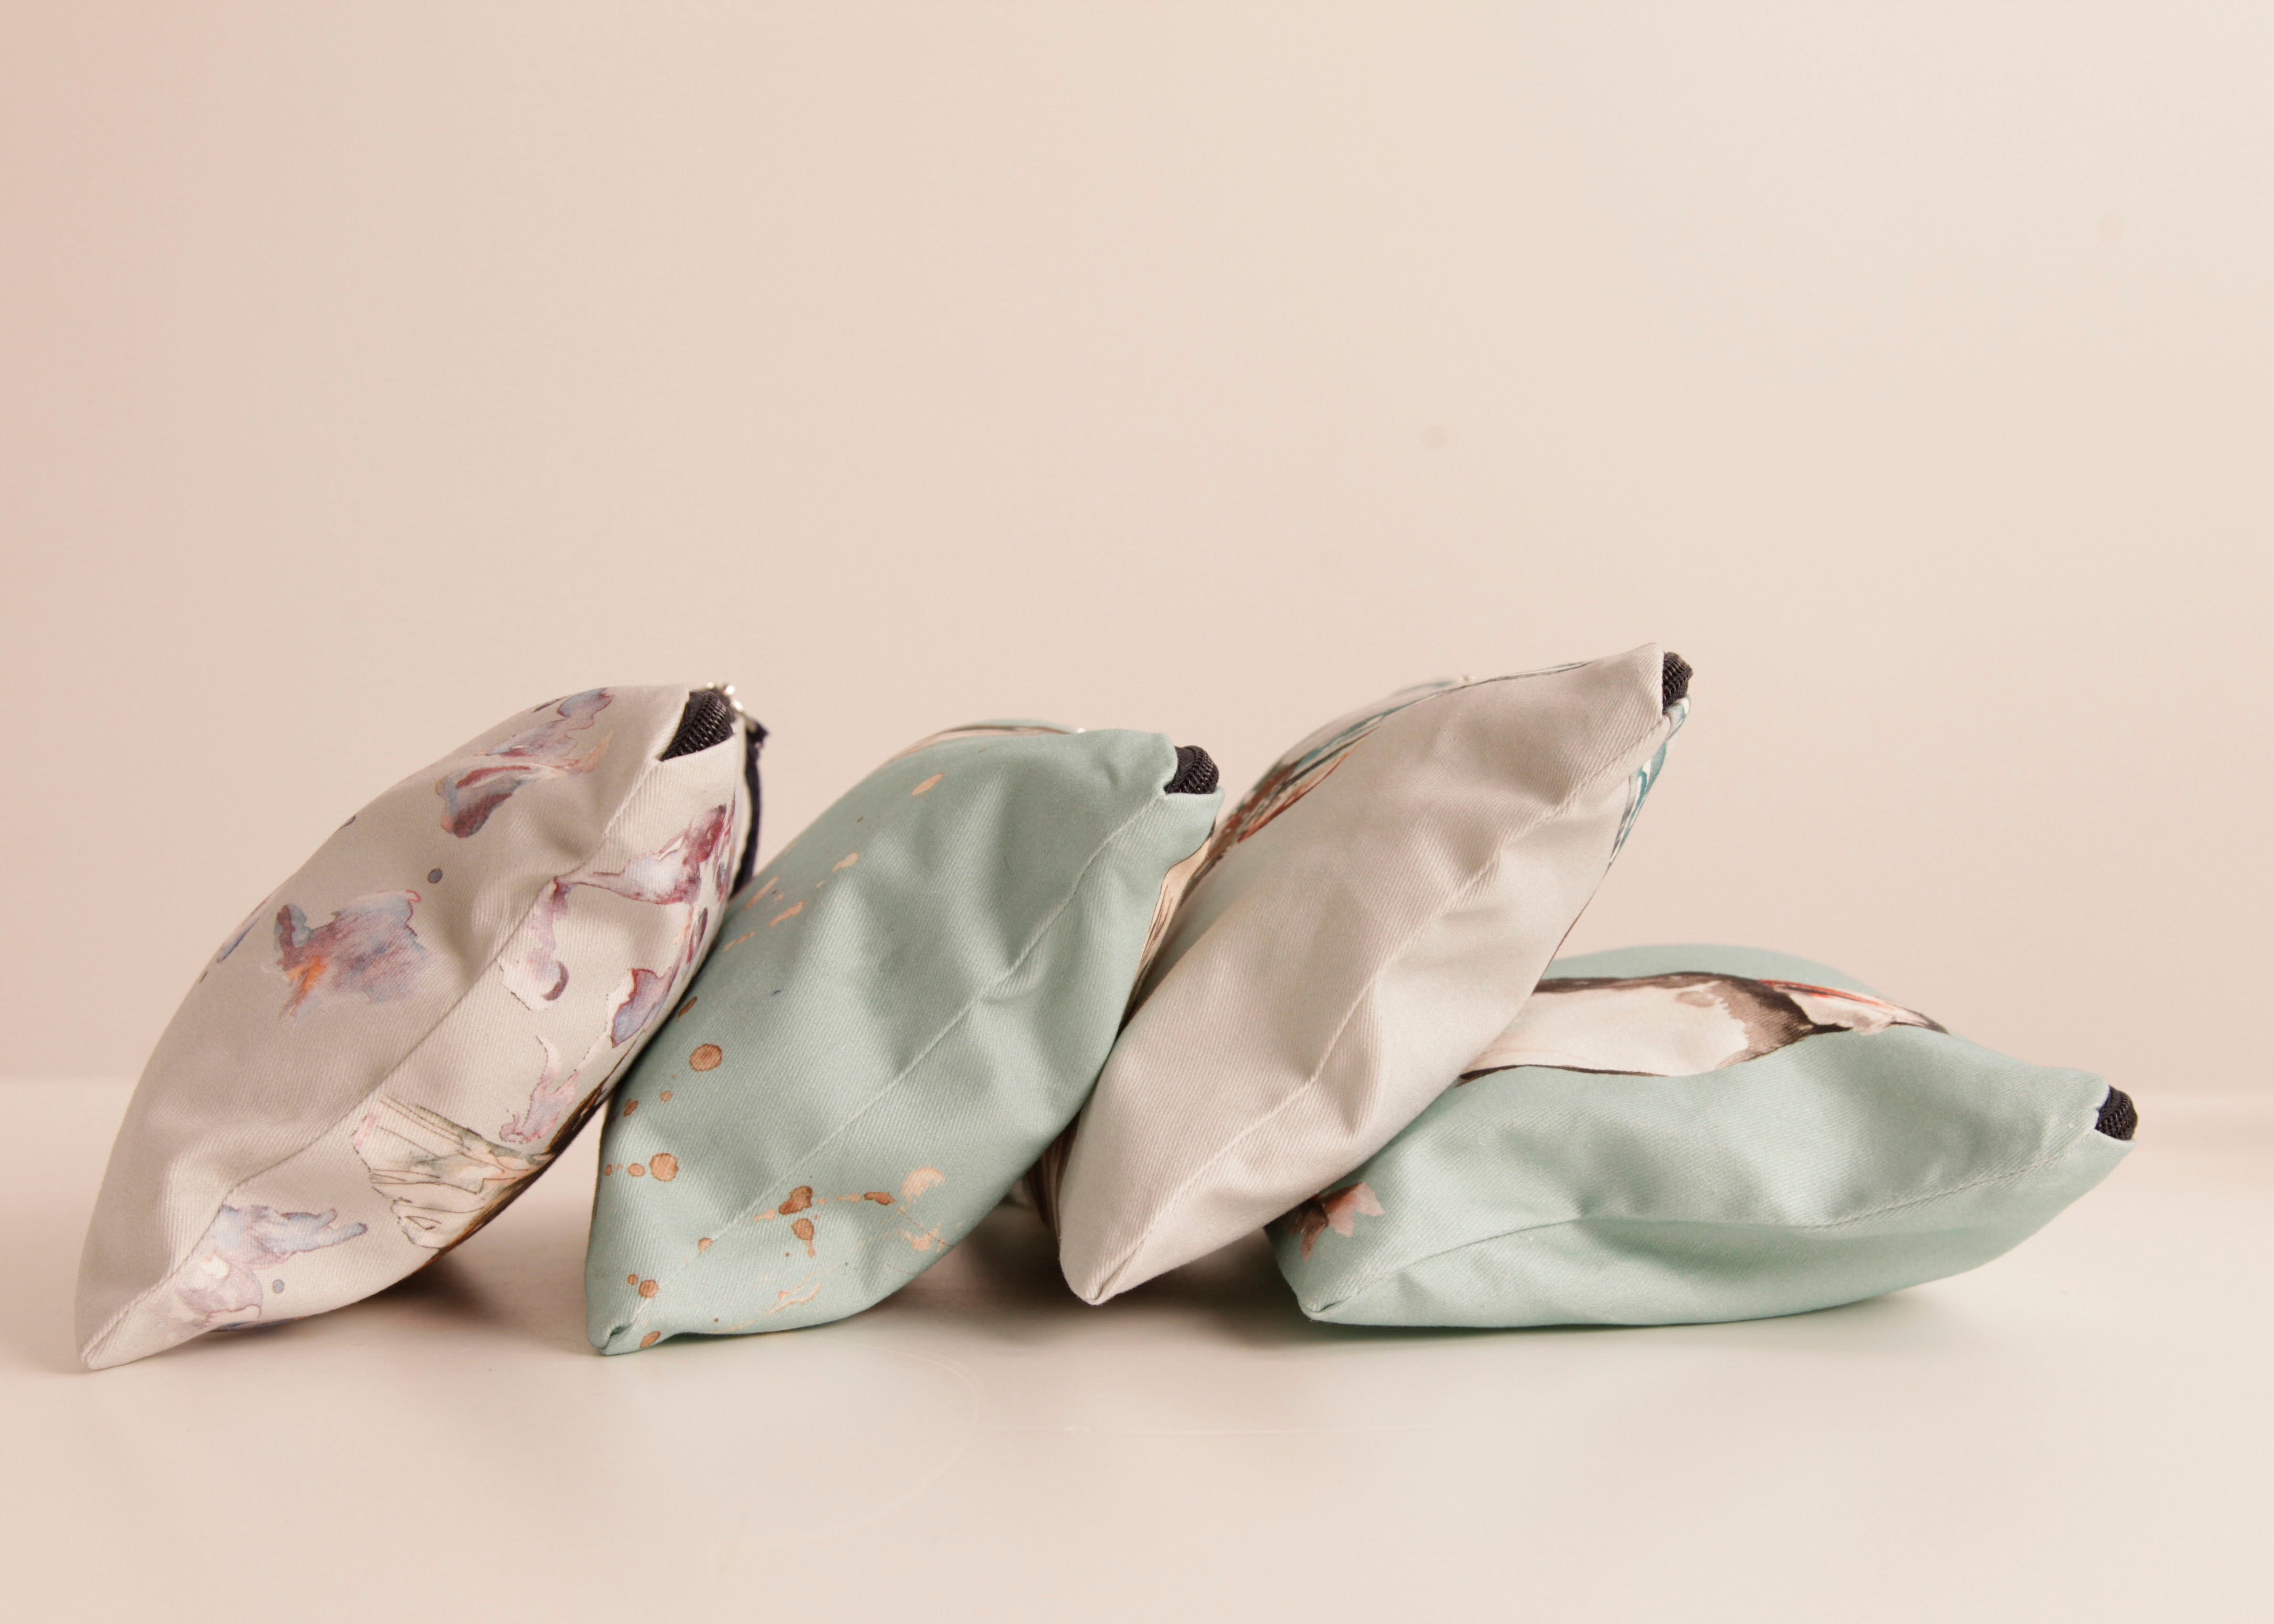 Stag Cotton Cosmetic Bags